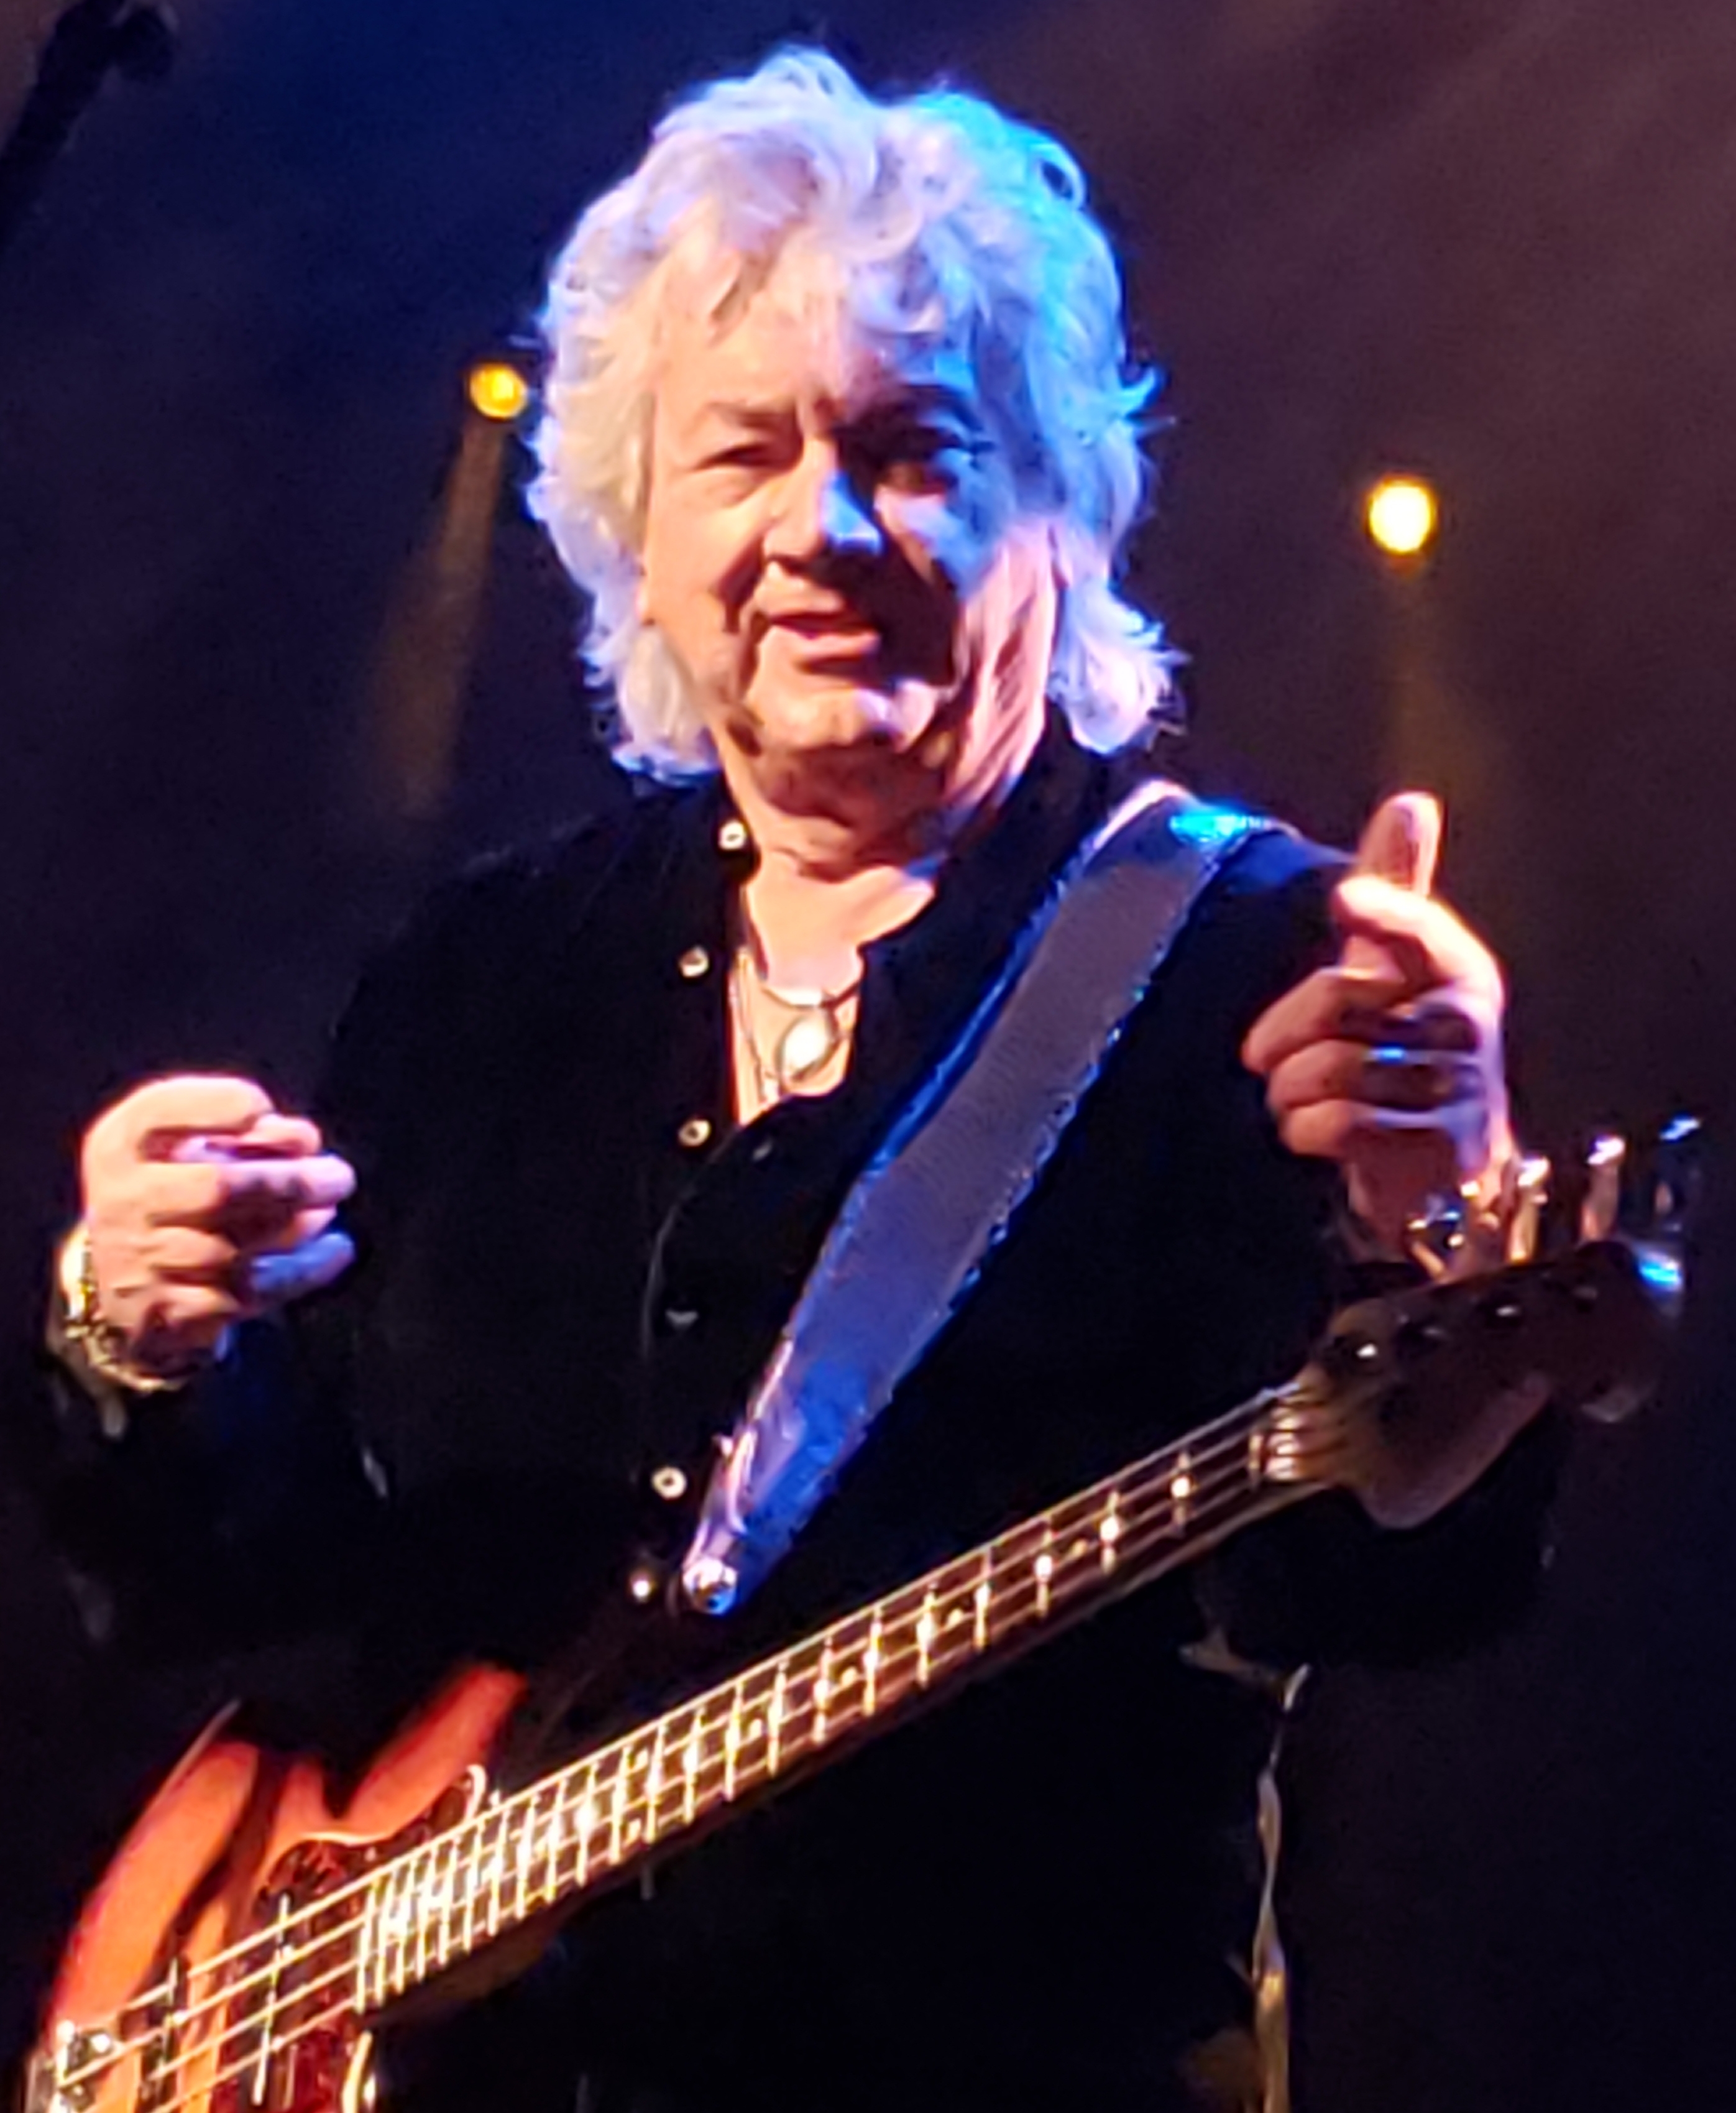 John Lohn of The Moody Blues at Northern Lights Theater at Potawatomi Casino - photo by Tommy Rage